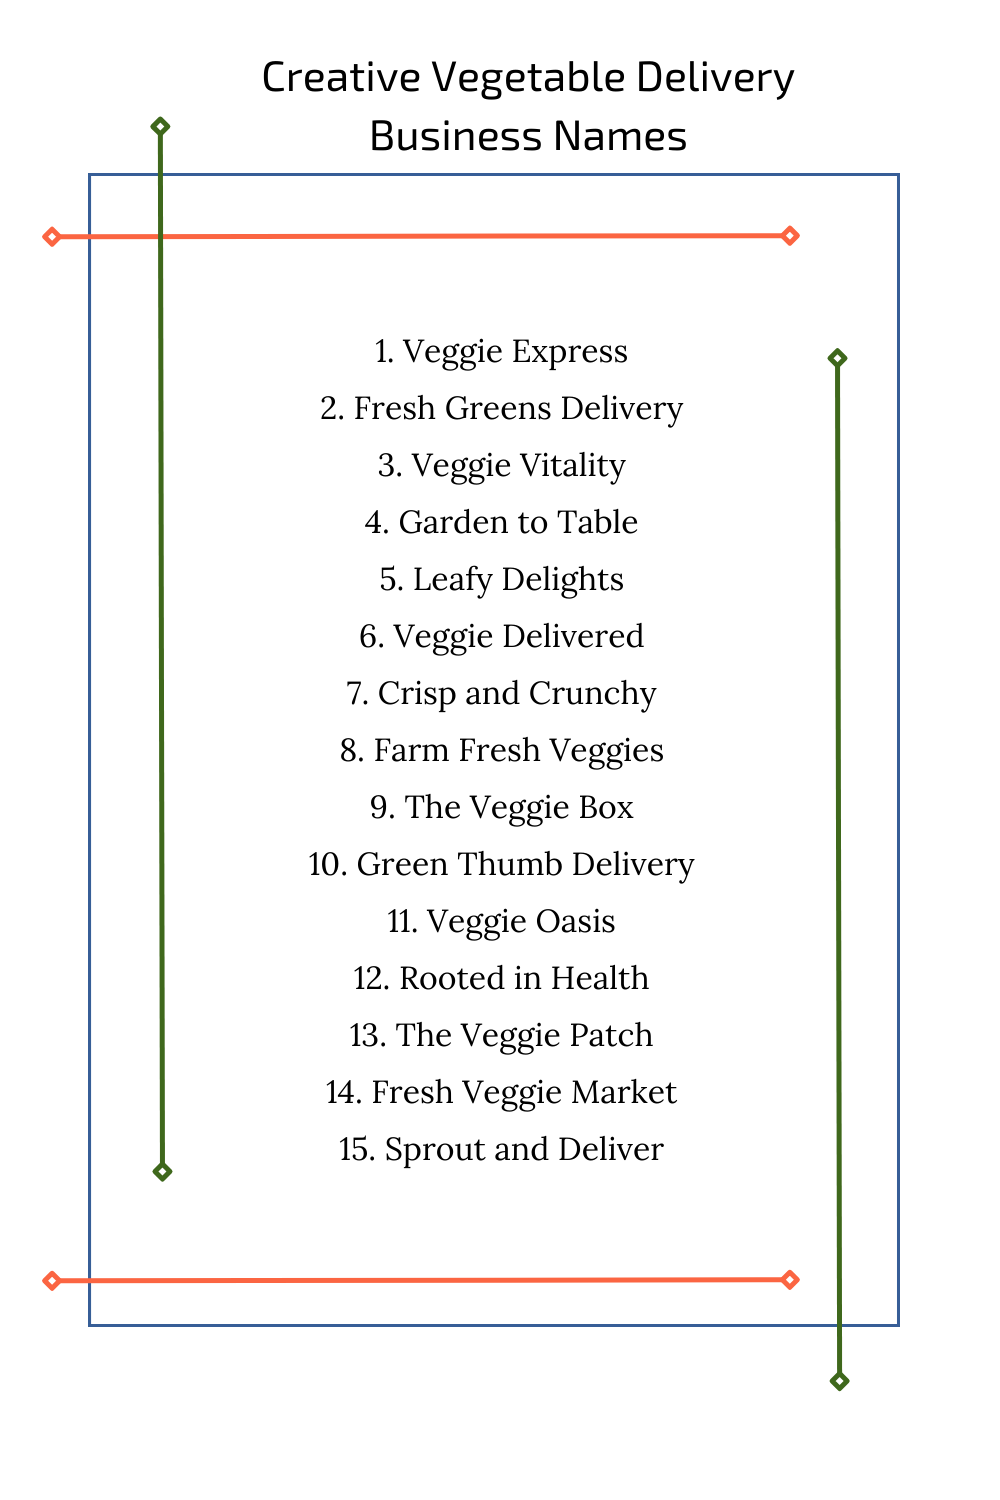 Creative Vegetable Delivery Business Names